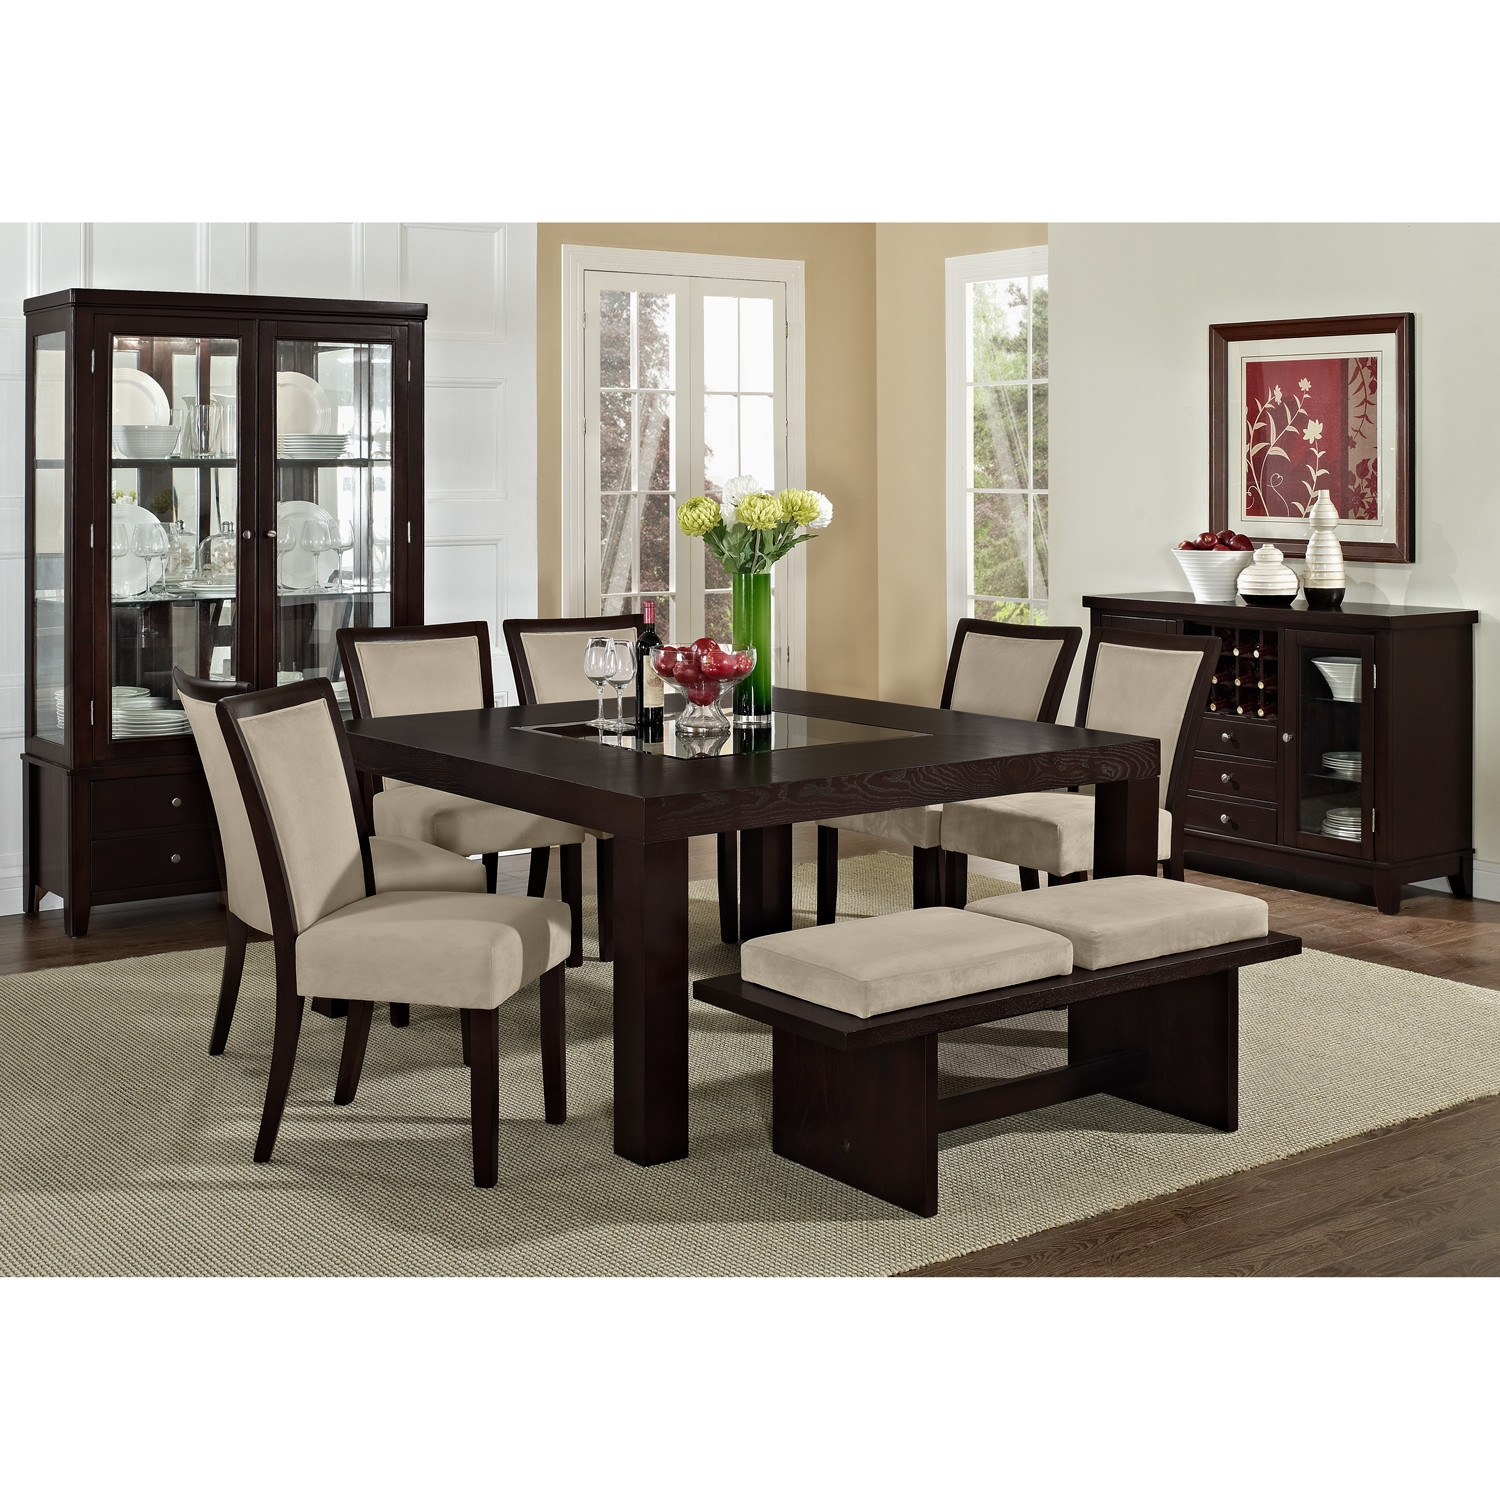 Value City Living Room Tables
 8 Value City Furniture Coffee Tables